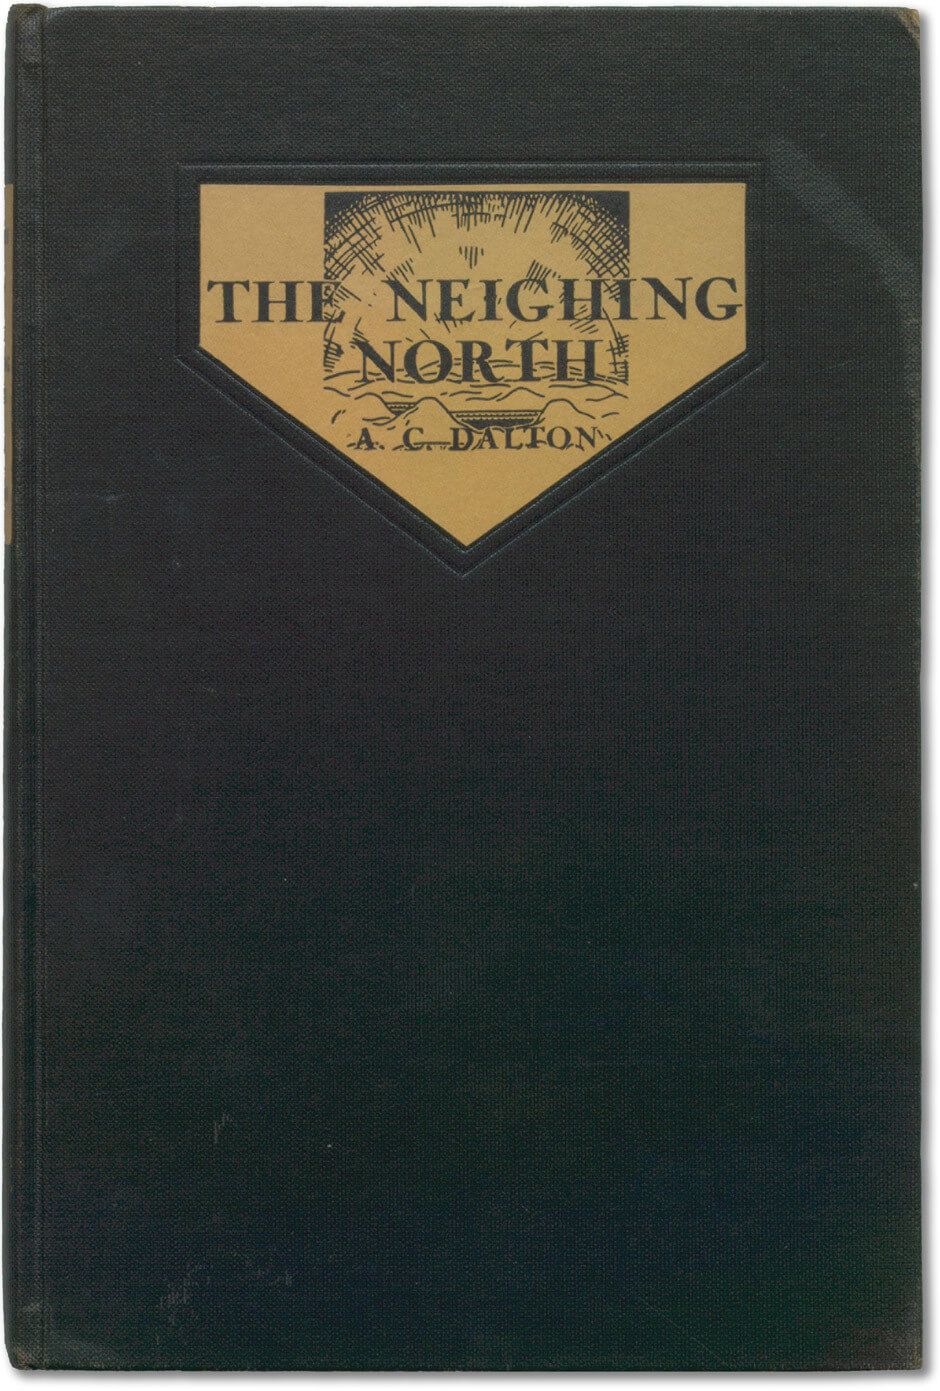 Art Canada Institute, Jock Macdonald, Macdonald's cover illustration for The Neighing North, by Annie Charlotte Dalton, 1931